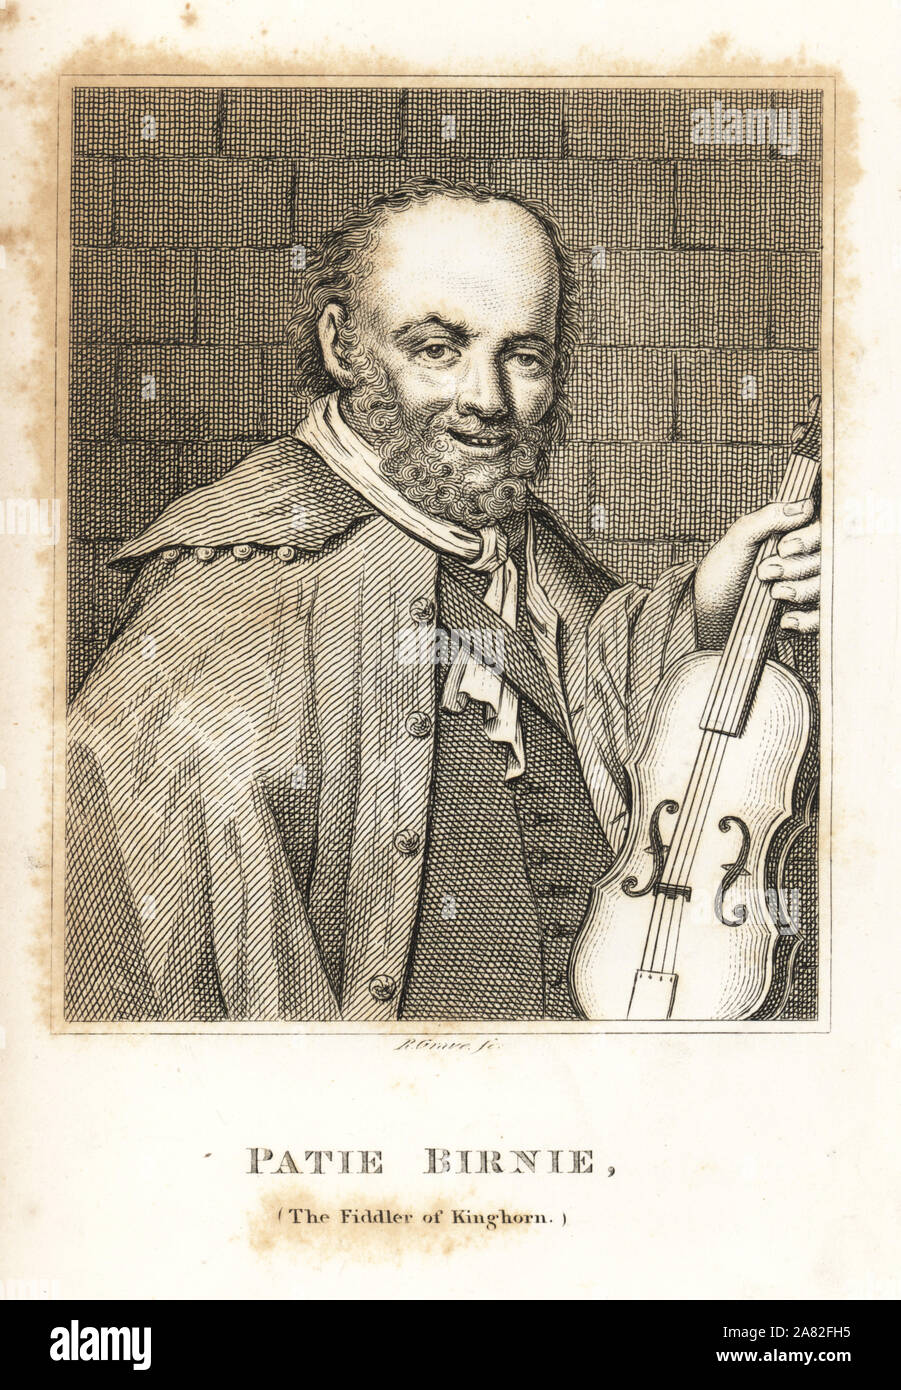 Patie Birnie, the fiddler of Kinghorn, poet, singer and pub musician, 18th century. Engraving by R. Grave from James Caulfield's Portraits, Memoirs and Characters of Remarkable Persons, London, 1819. Stock Photo